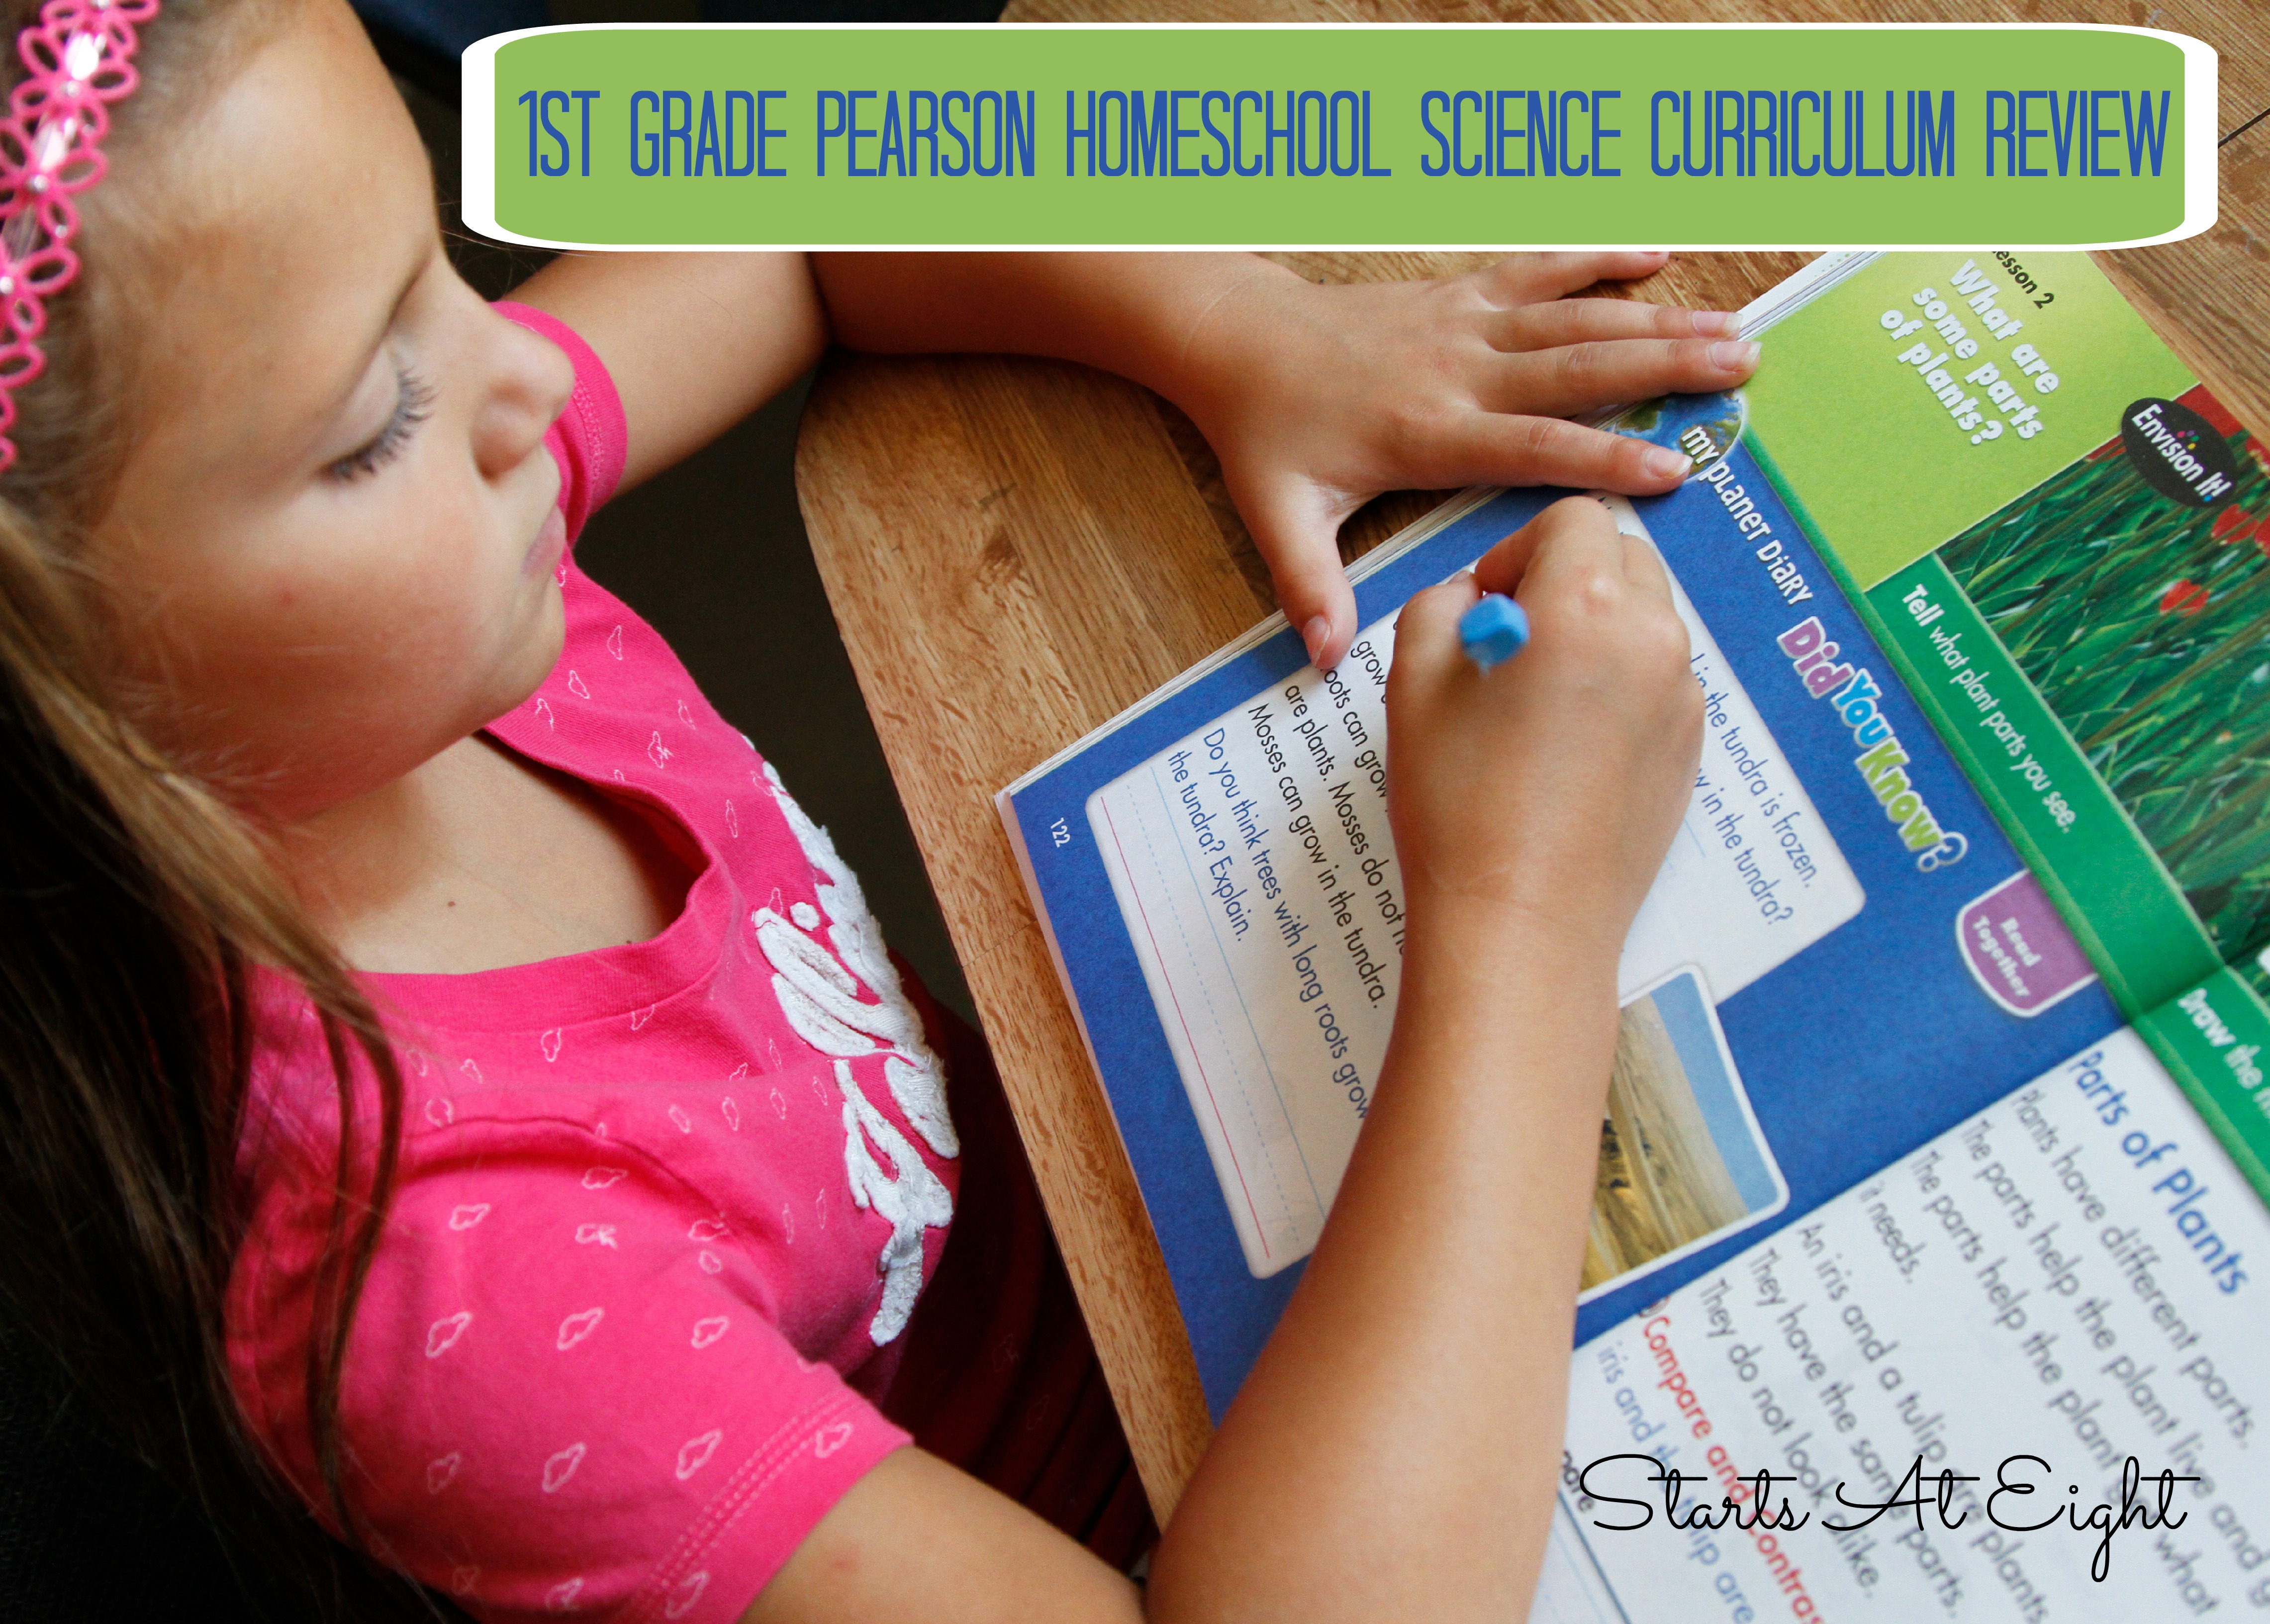 1st Grade Pearson Homeschool Science Curriculum Review